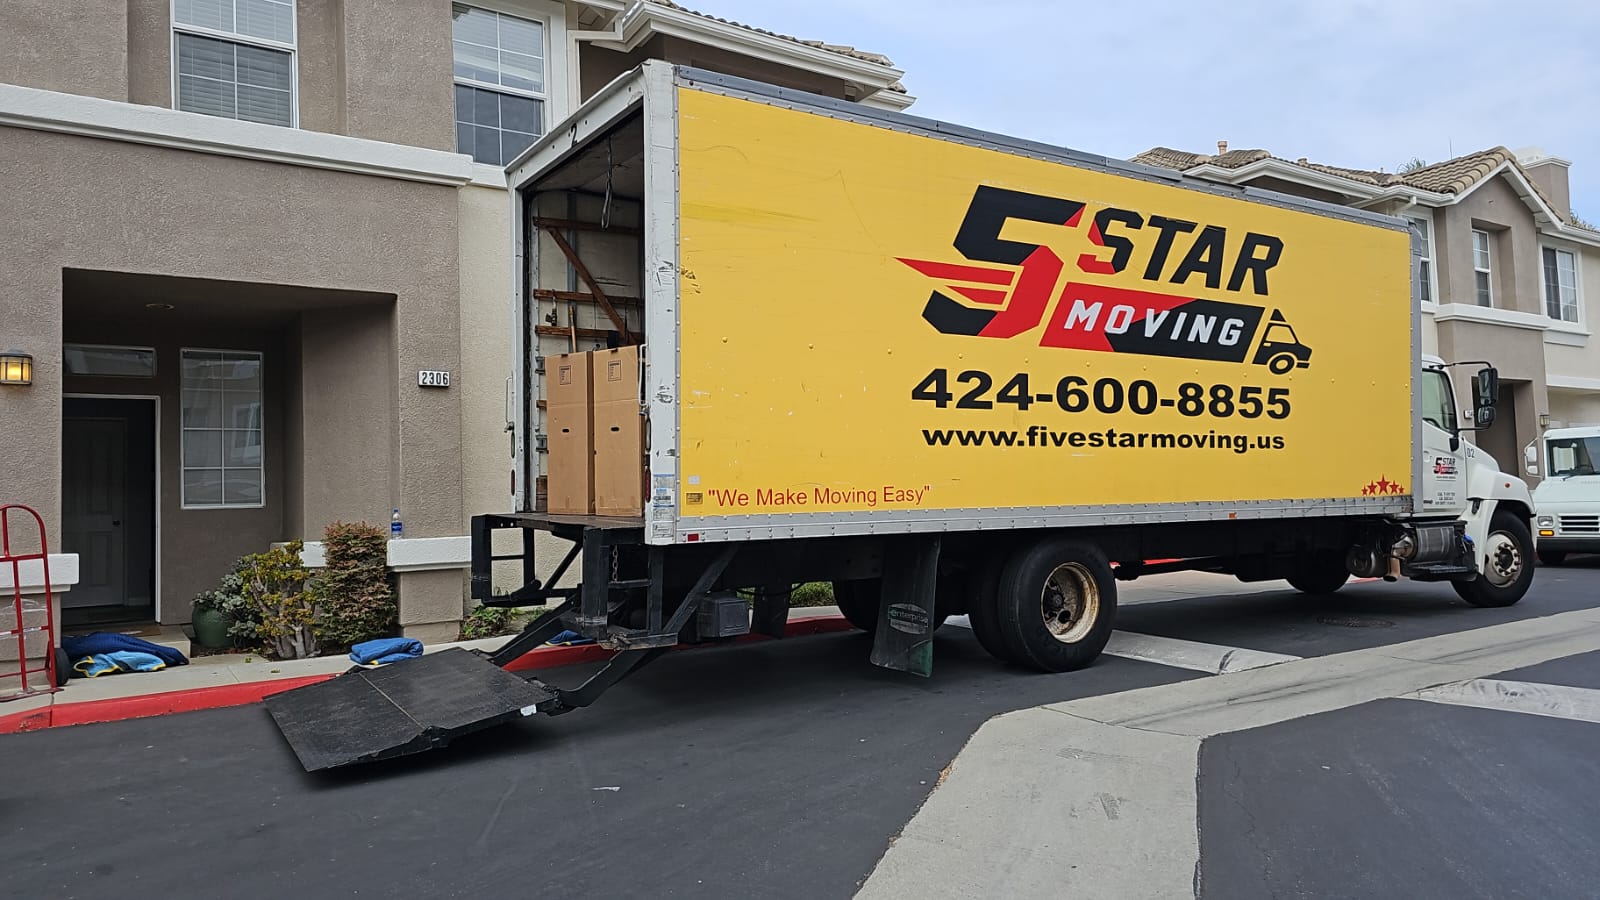 Five Star Moving and Storage - Professional Moving Company Los Angeles